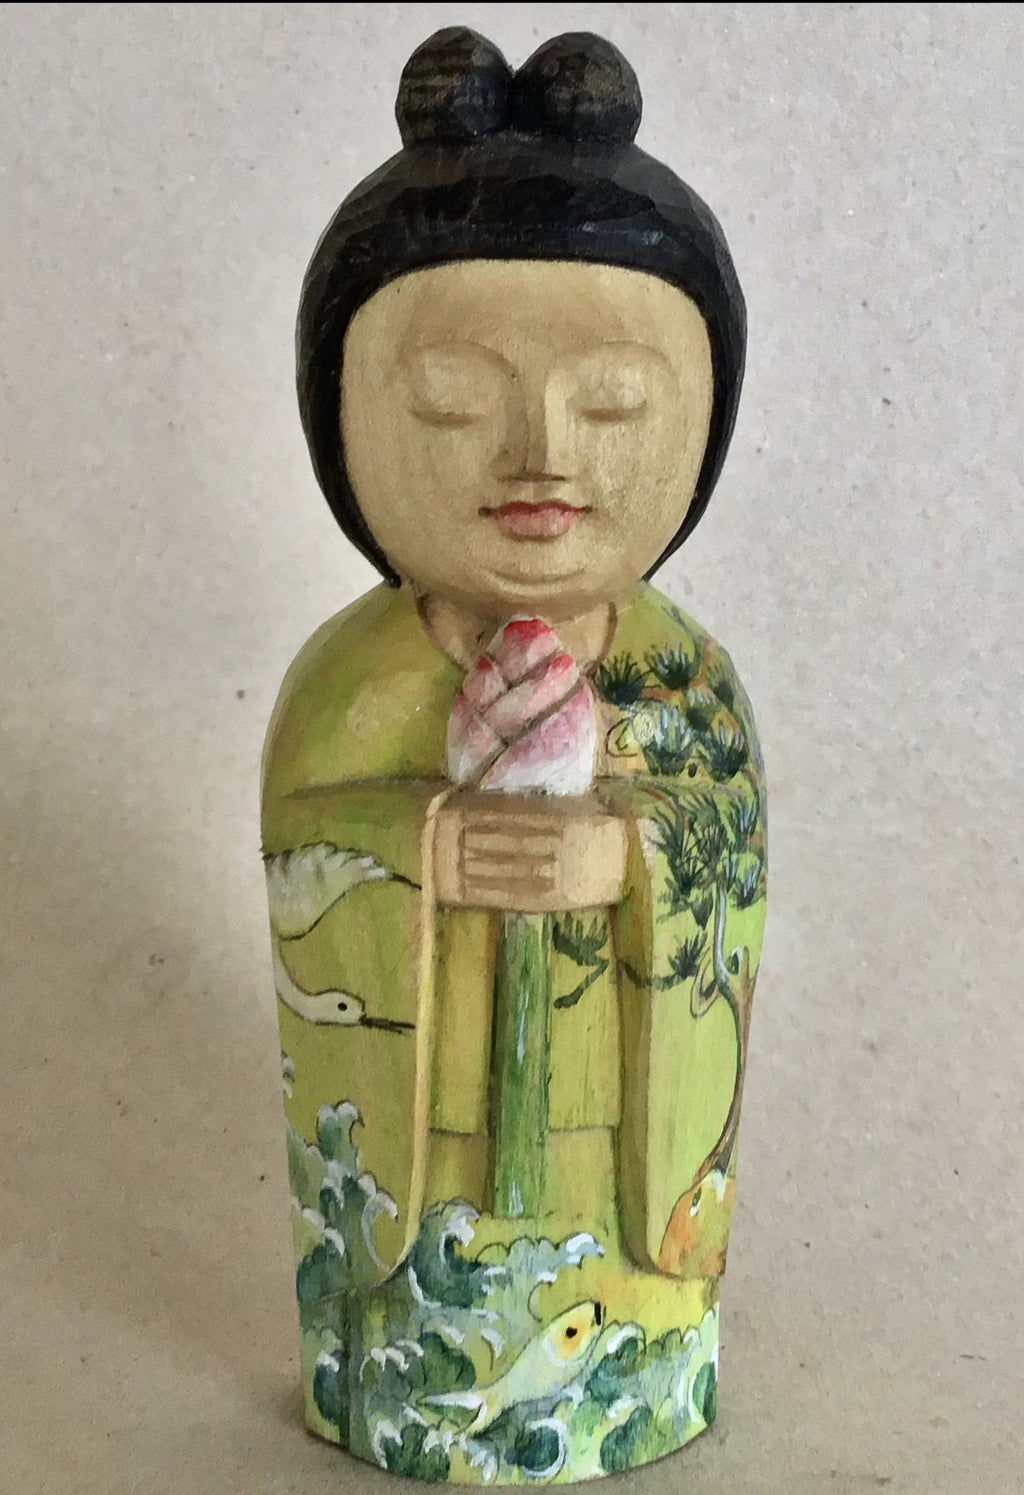 A little hand carved wood Kannon or Quan Yin. She has black hair with 2 top knots, natural light wood skin and her kimono is painted with cranes and fish and waves and pine trees. She is holding a lotus bud, which symbolizes our Buddha nature ready to be revealed.